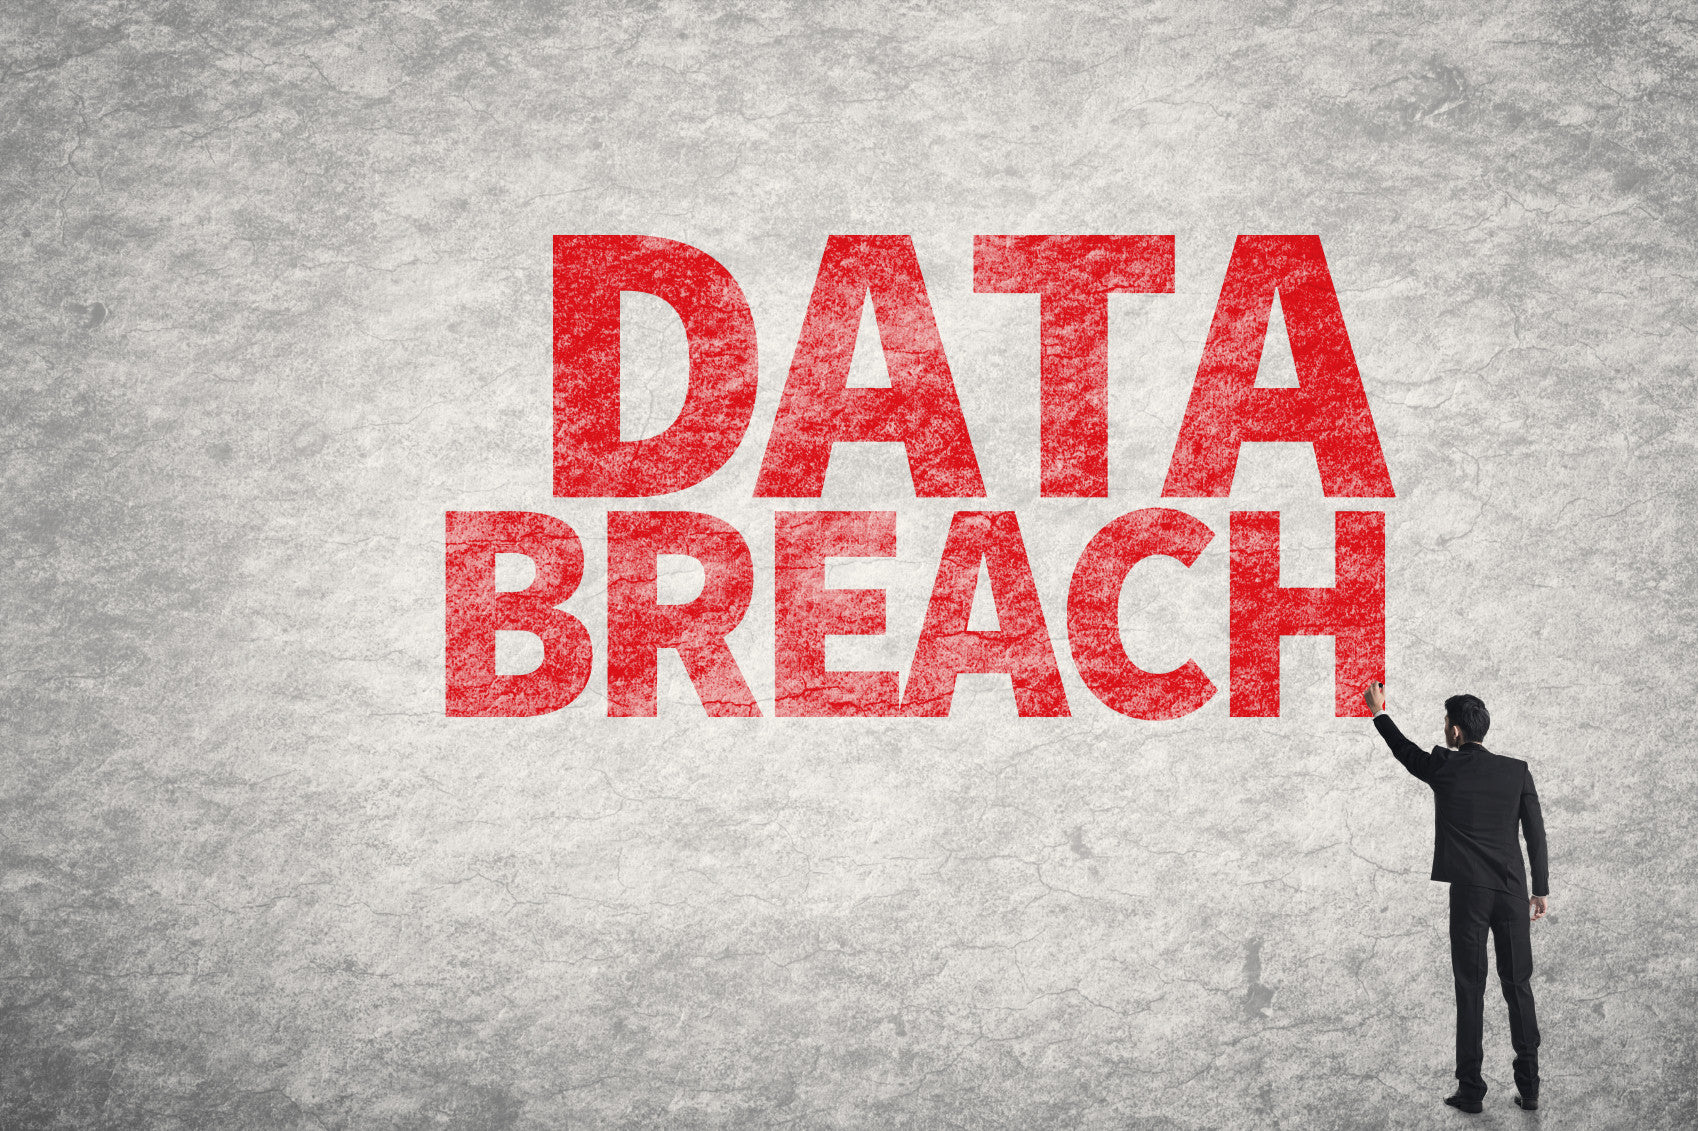 Looking Back 2015 - A Year of Breaches